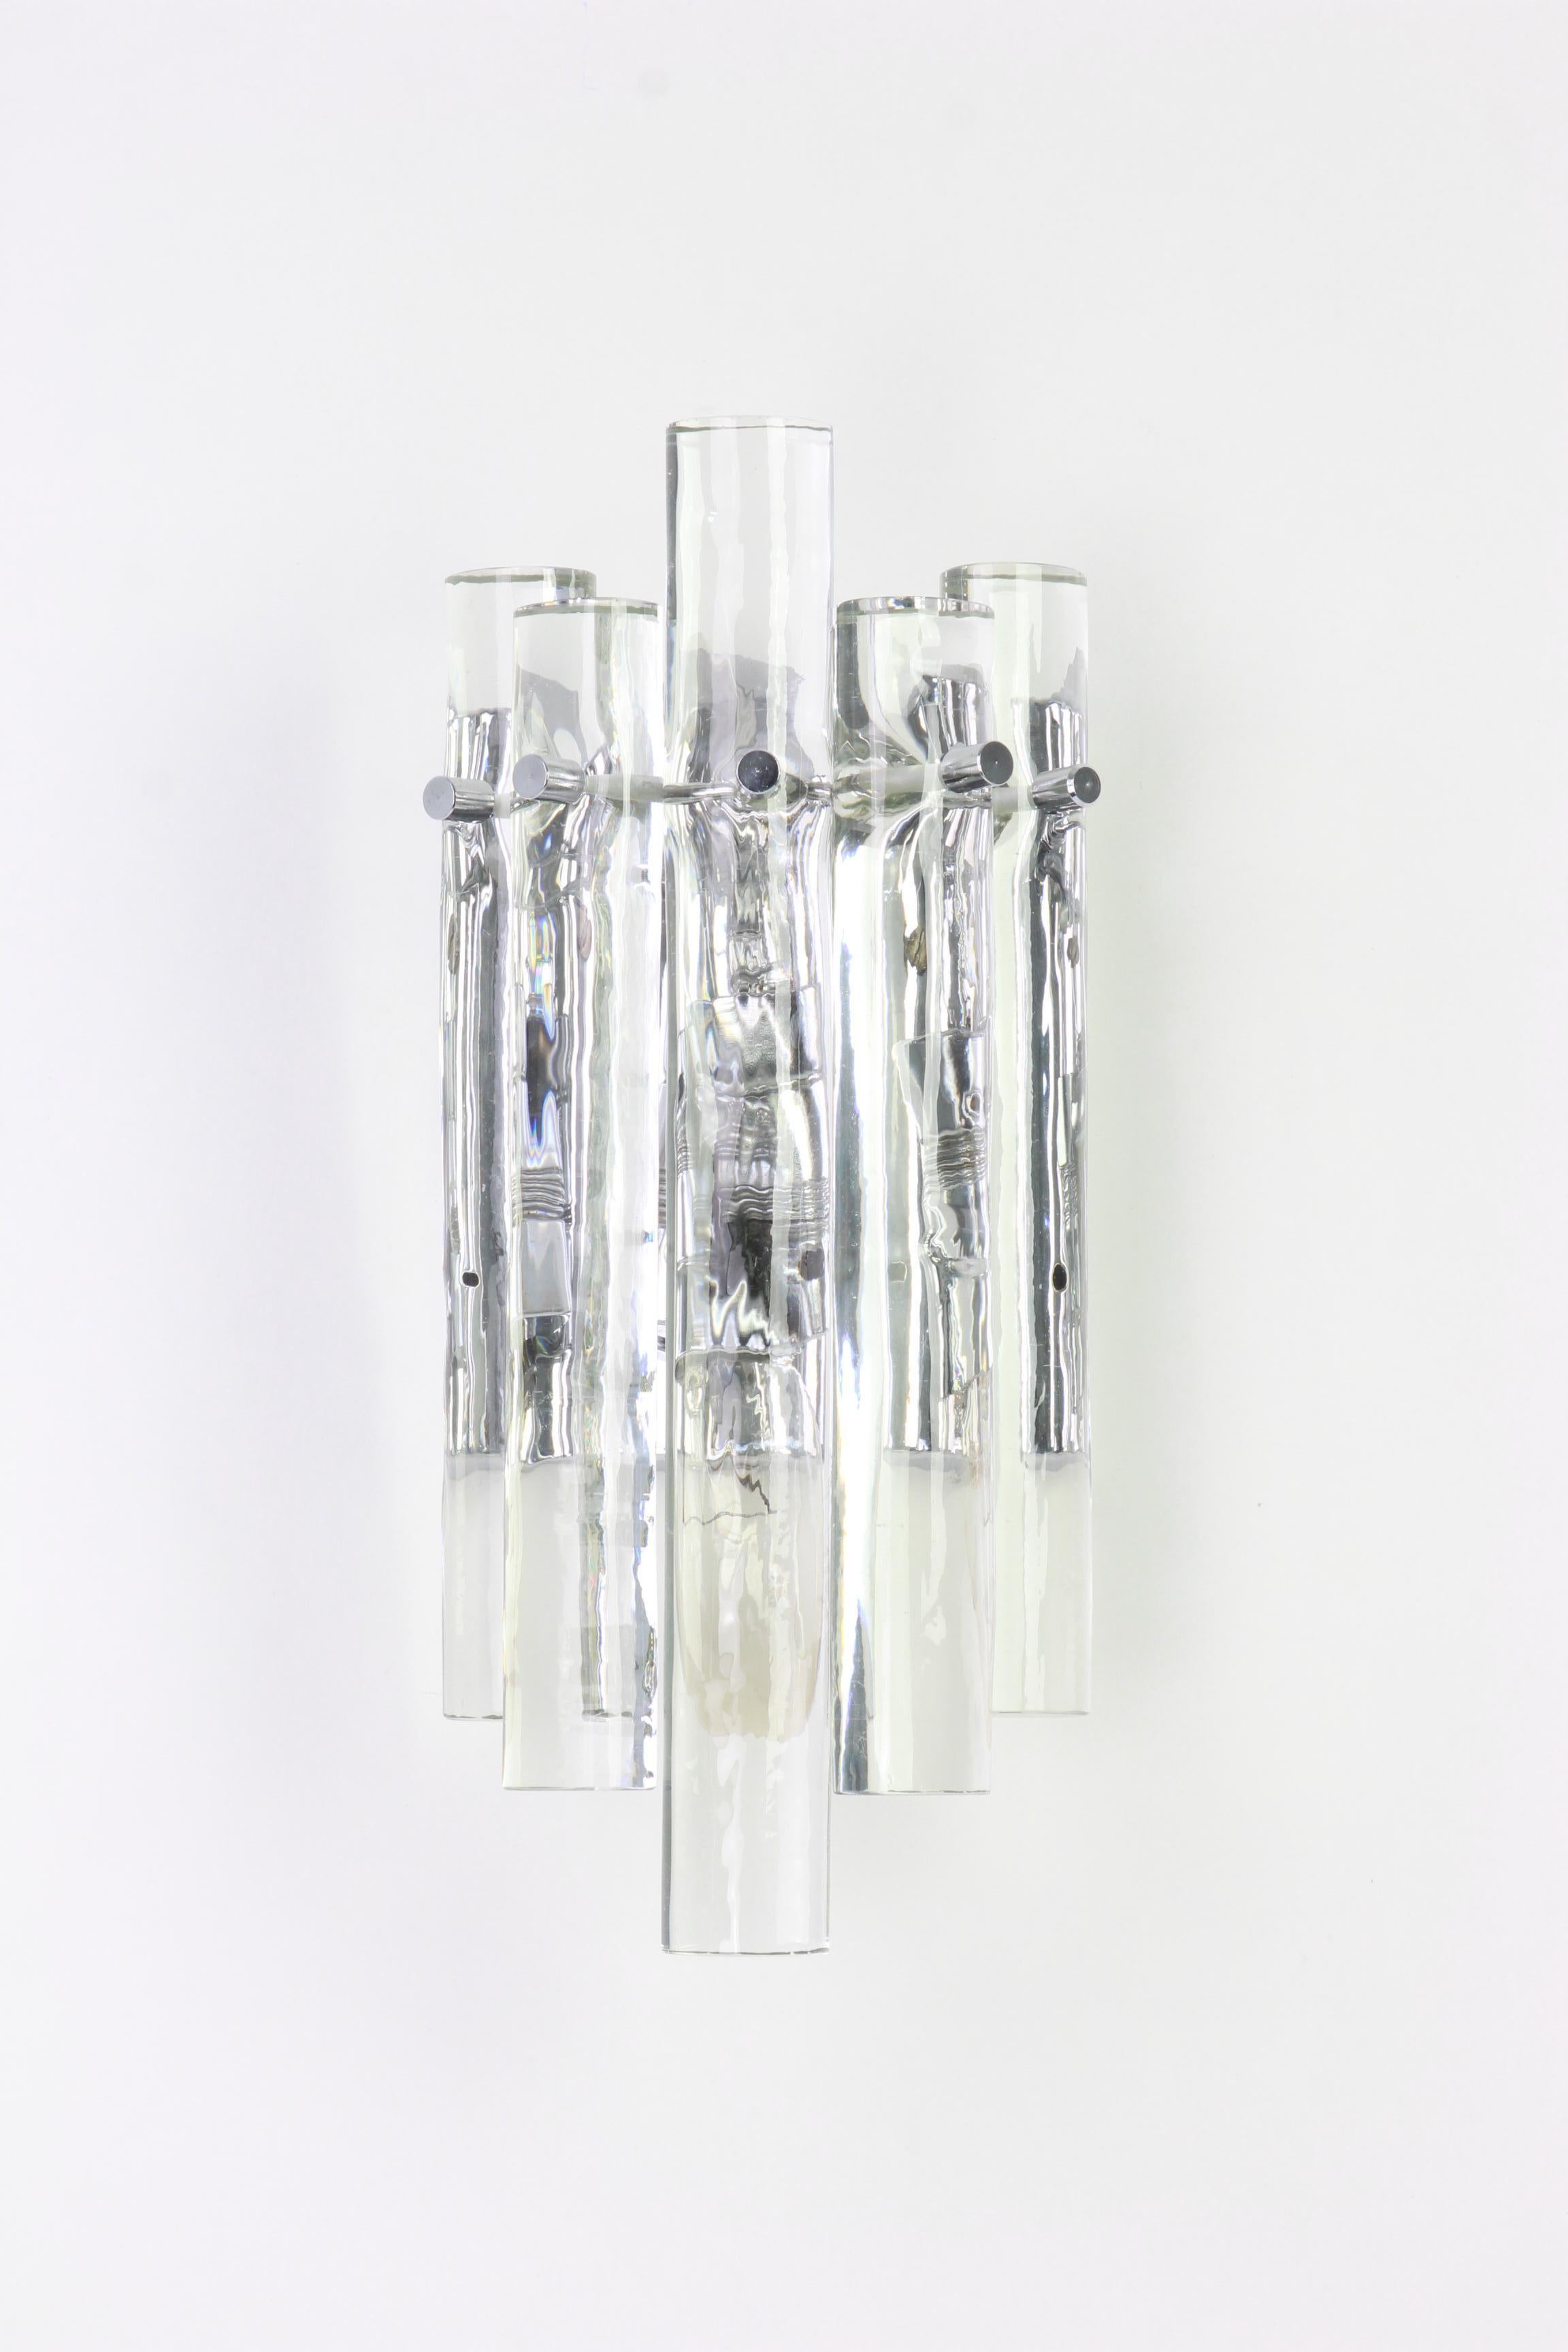 A stunning pair of chrome sconces with crystal glasses, made by Kinkeldey, Germany, circa 1970-1979. It’s composed of crystal glass pieces on a chrome frame.
From the Serie: Cascade

Best of the 1970s from Germany.

Dimensions:
H 10.6 in. x W